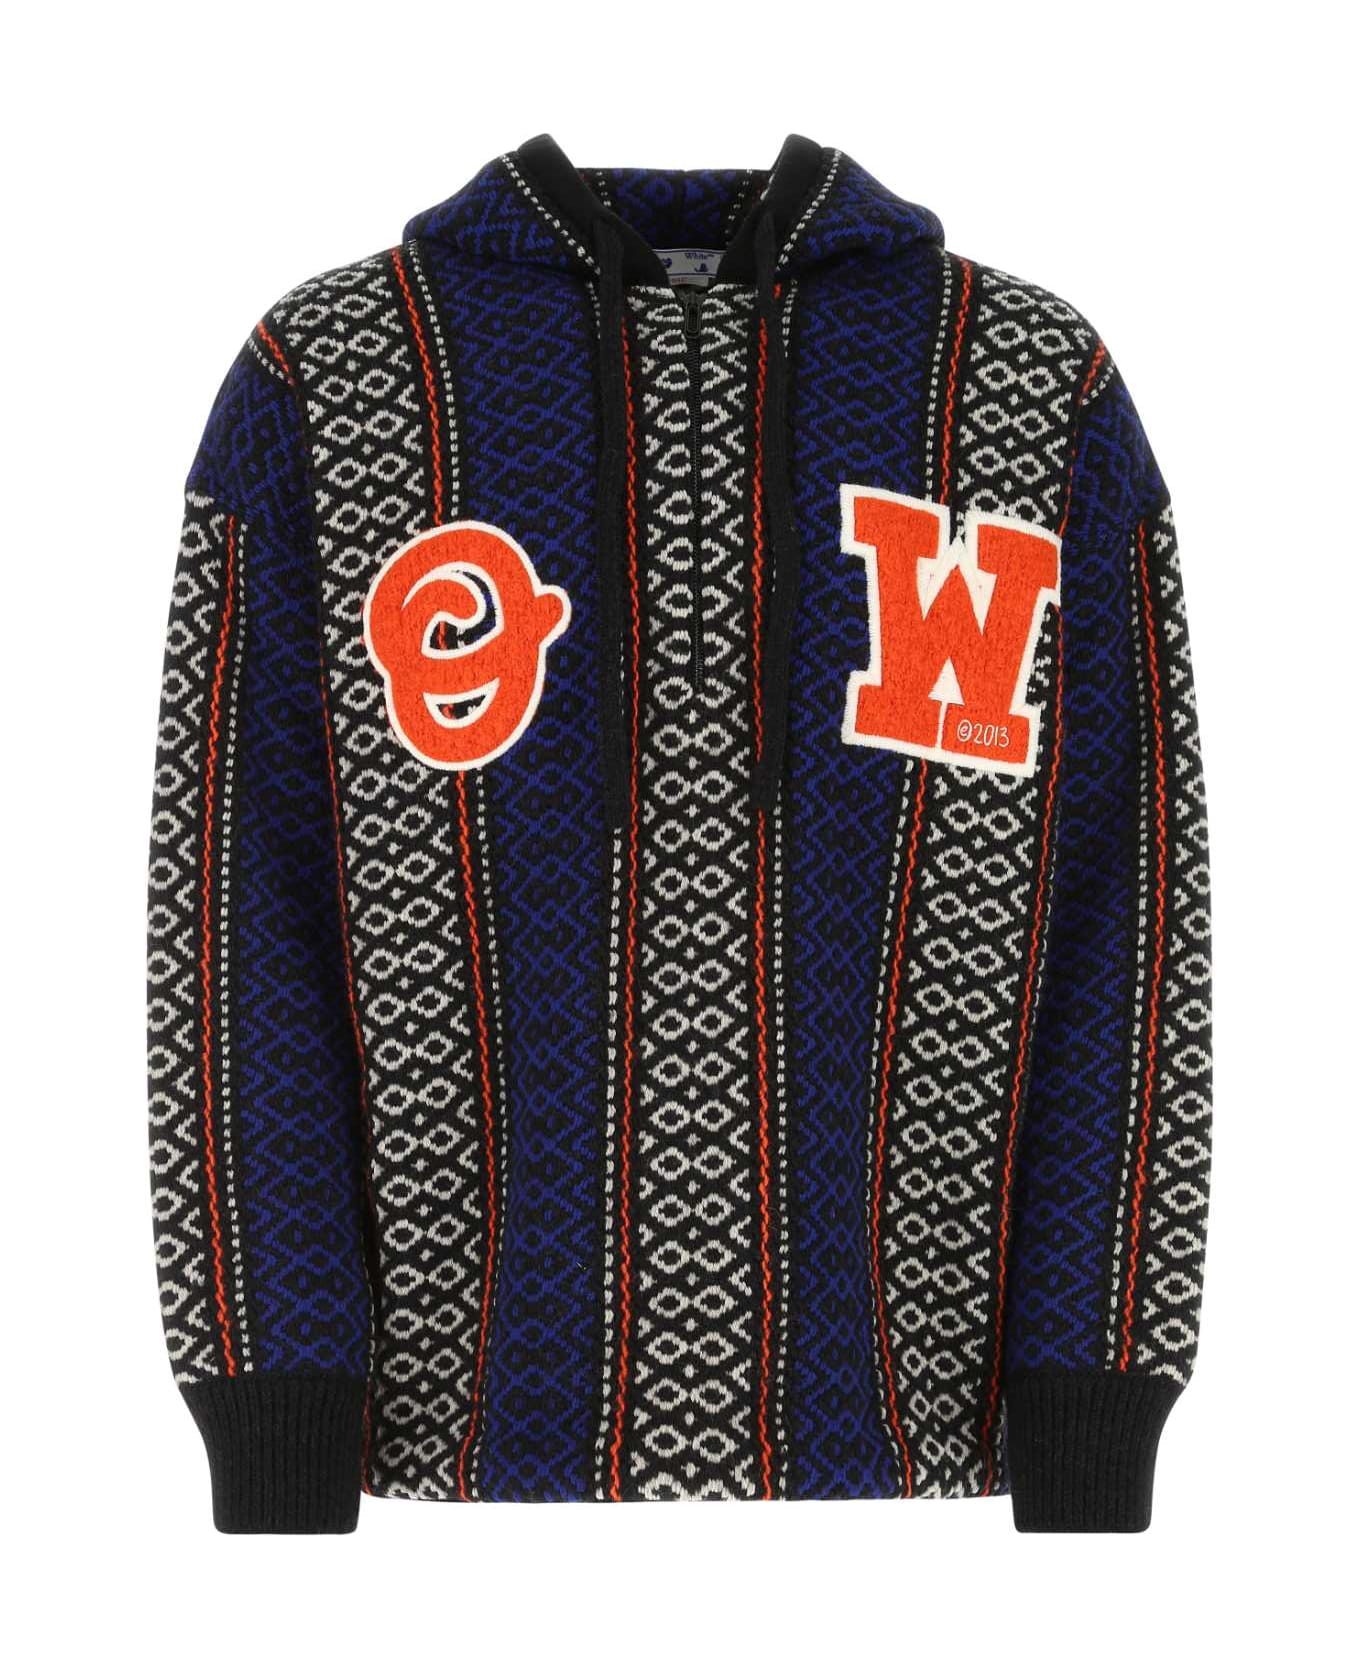 Off-White Embroidered Wool Blend Oversize Sweater - 6020